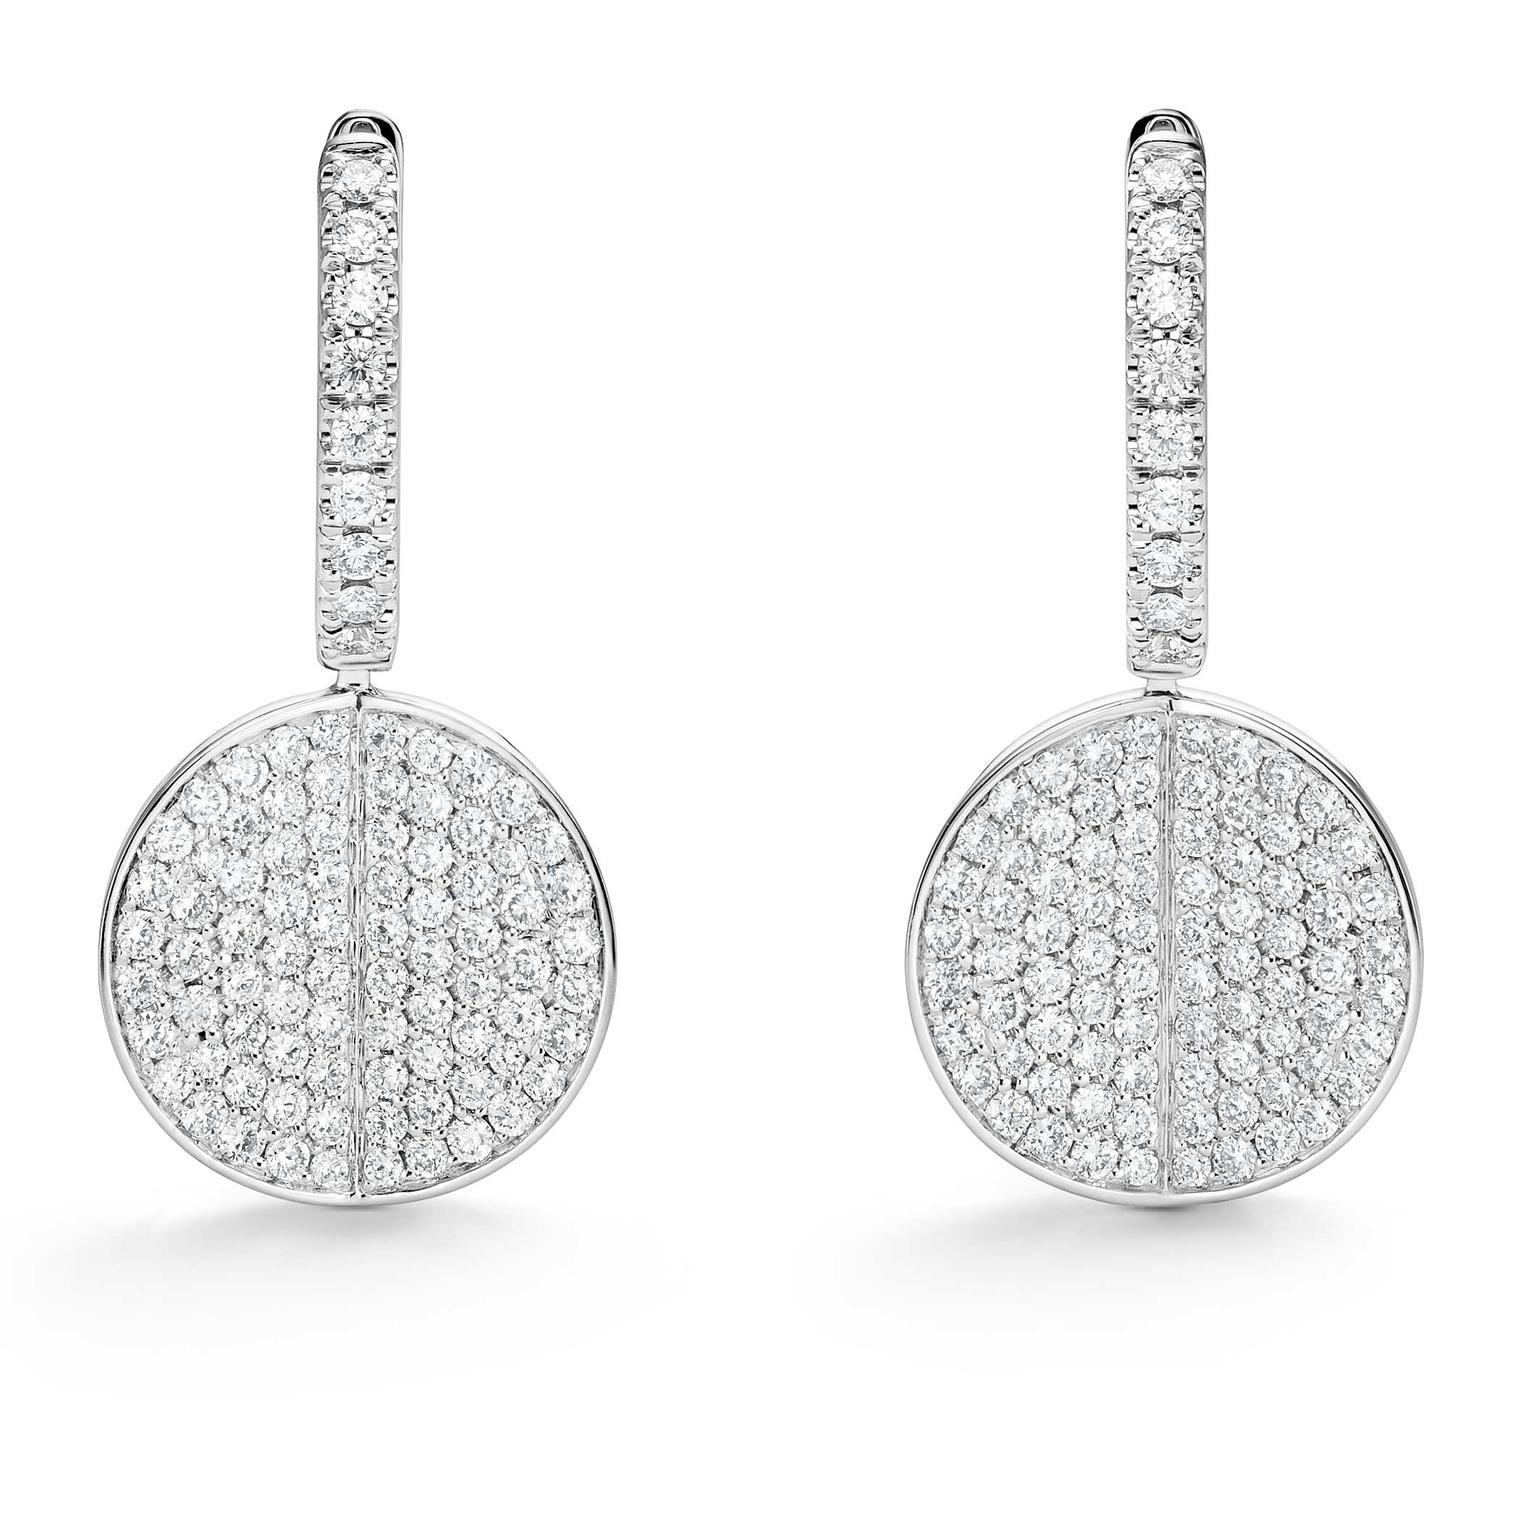 Bucherer B Dimension earrings with diamonds in white gold Price £3500